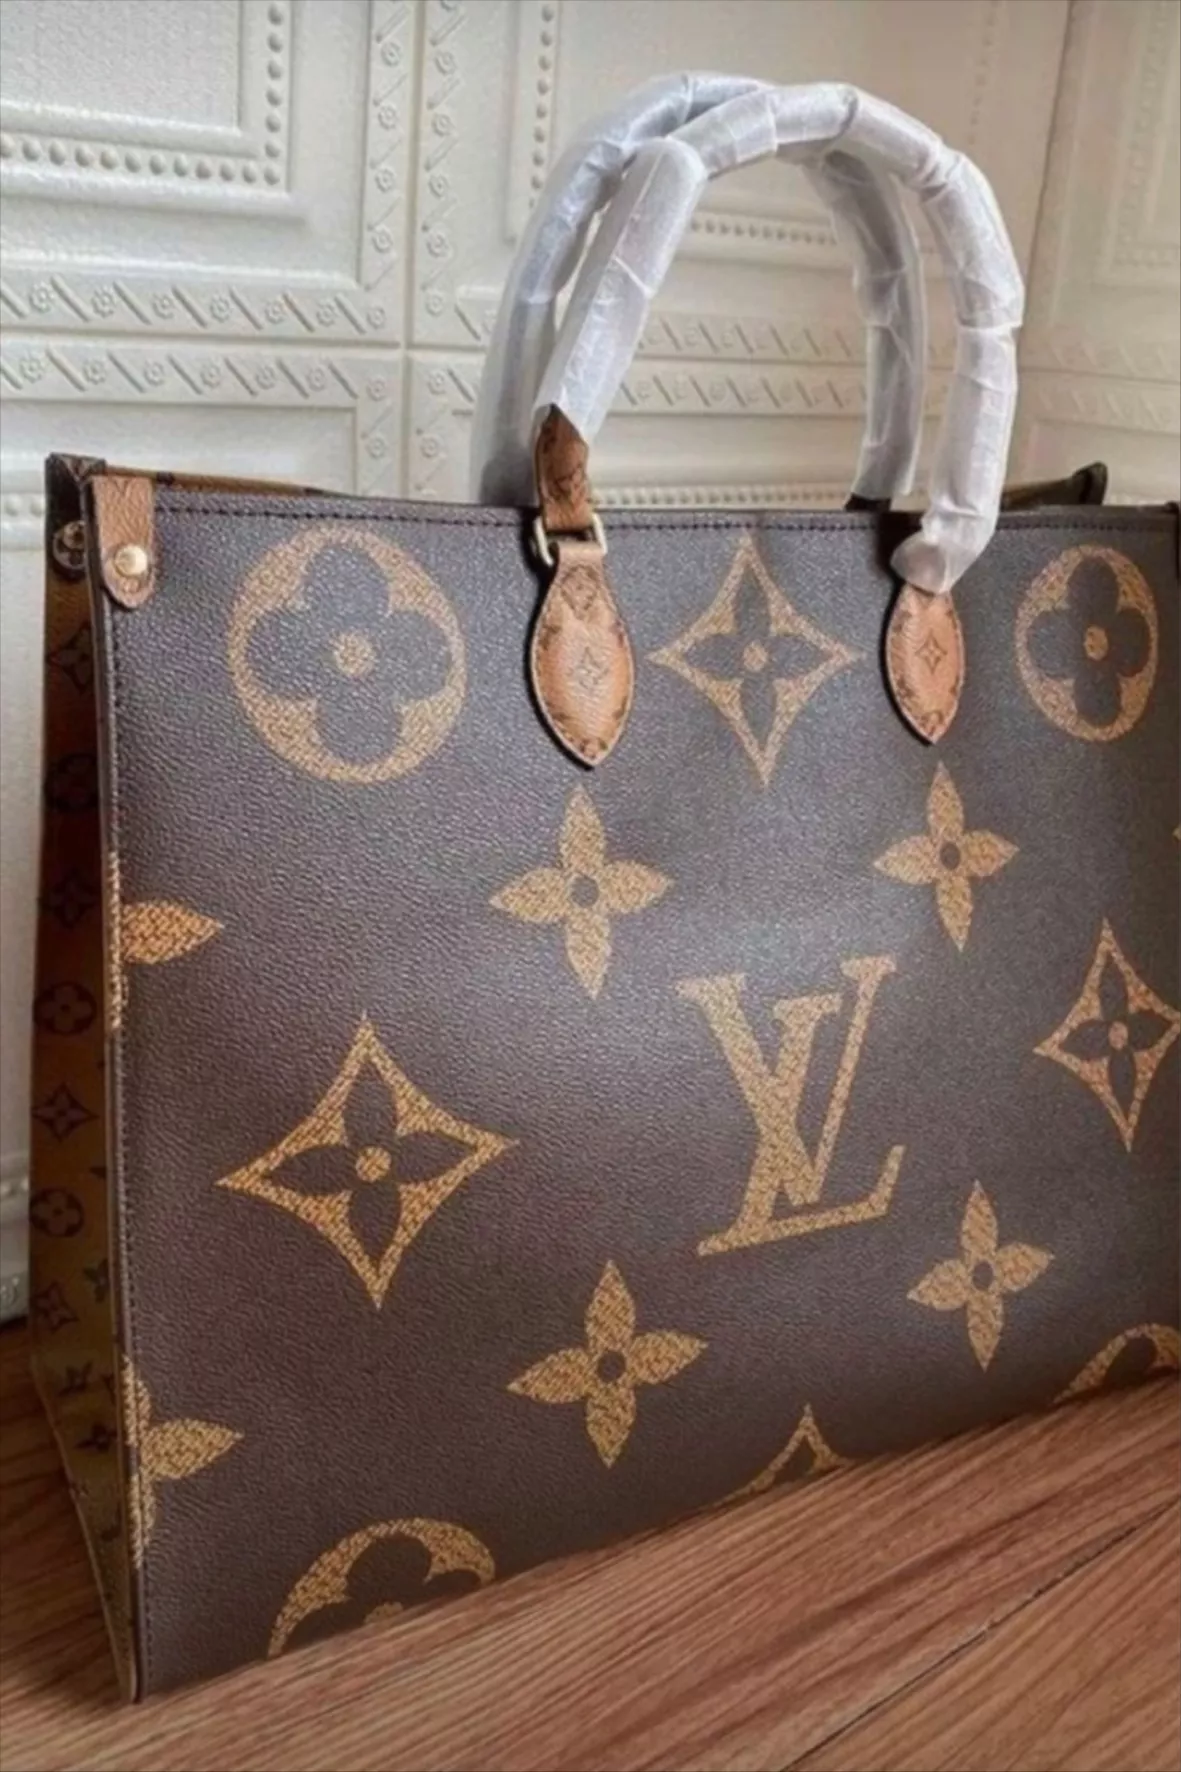 I need help finding the Louis Vuitton Saint Cloud in a size GM : r/DHgate